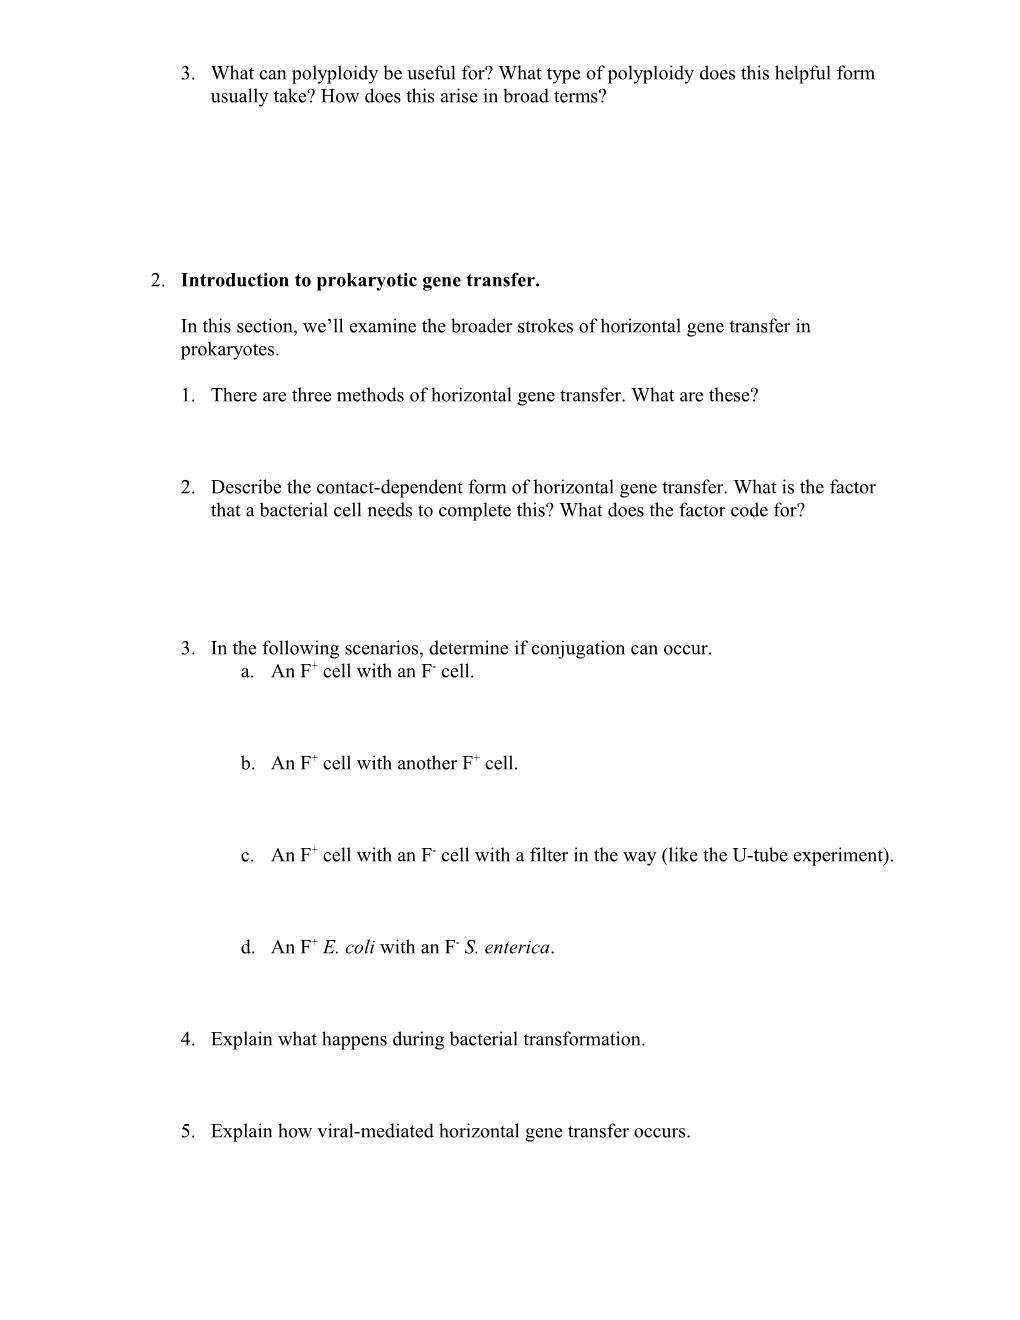 Introduction: This Worksheet Discusses Material Covered in the Twenty-Fourth and Twenty-Fifth